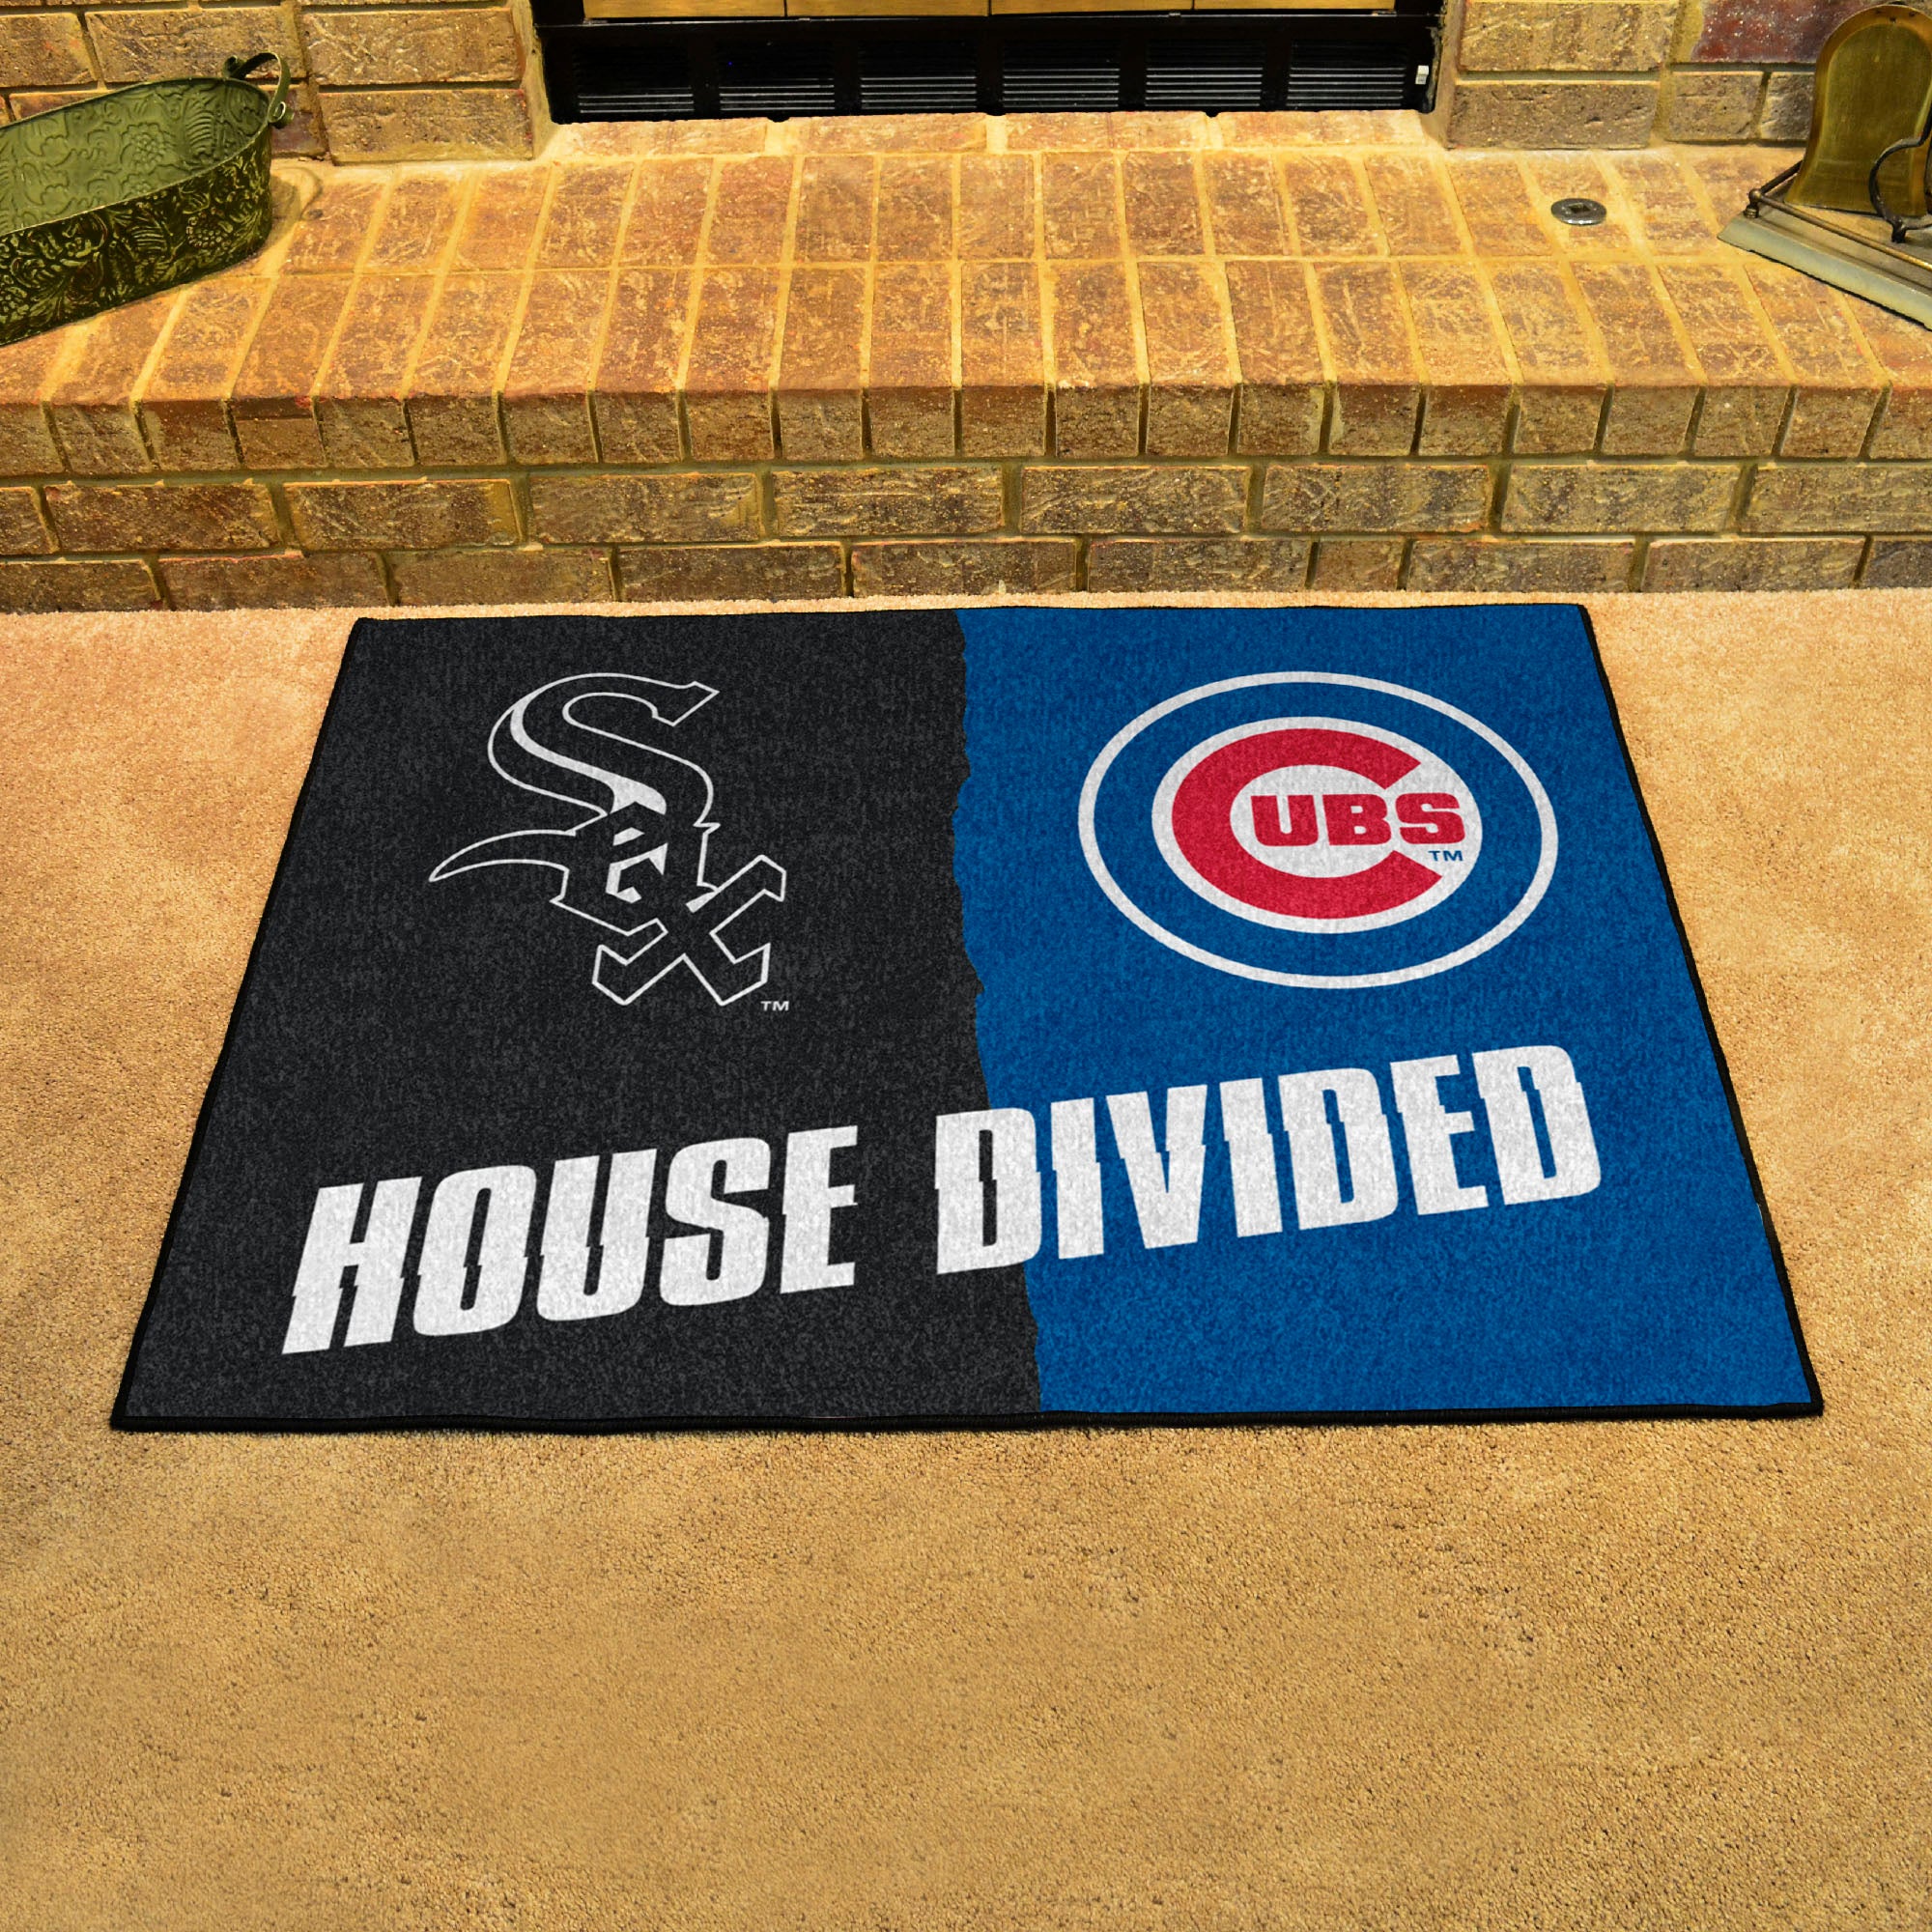 FANMATS, MLB House Divided - Yankees / Indians House Divided Rug